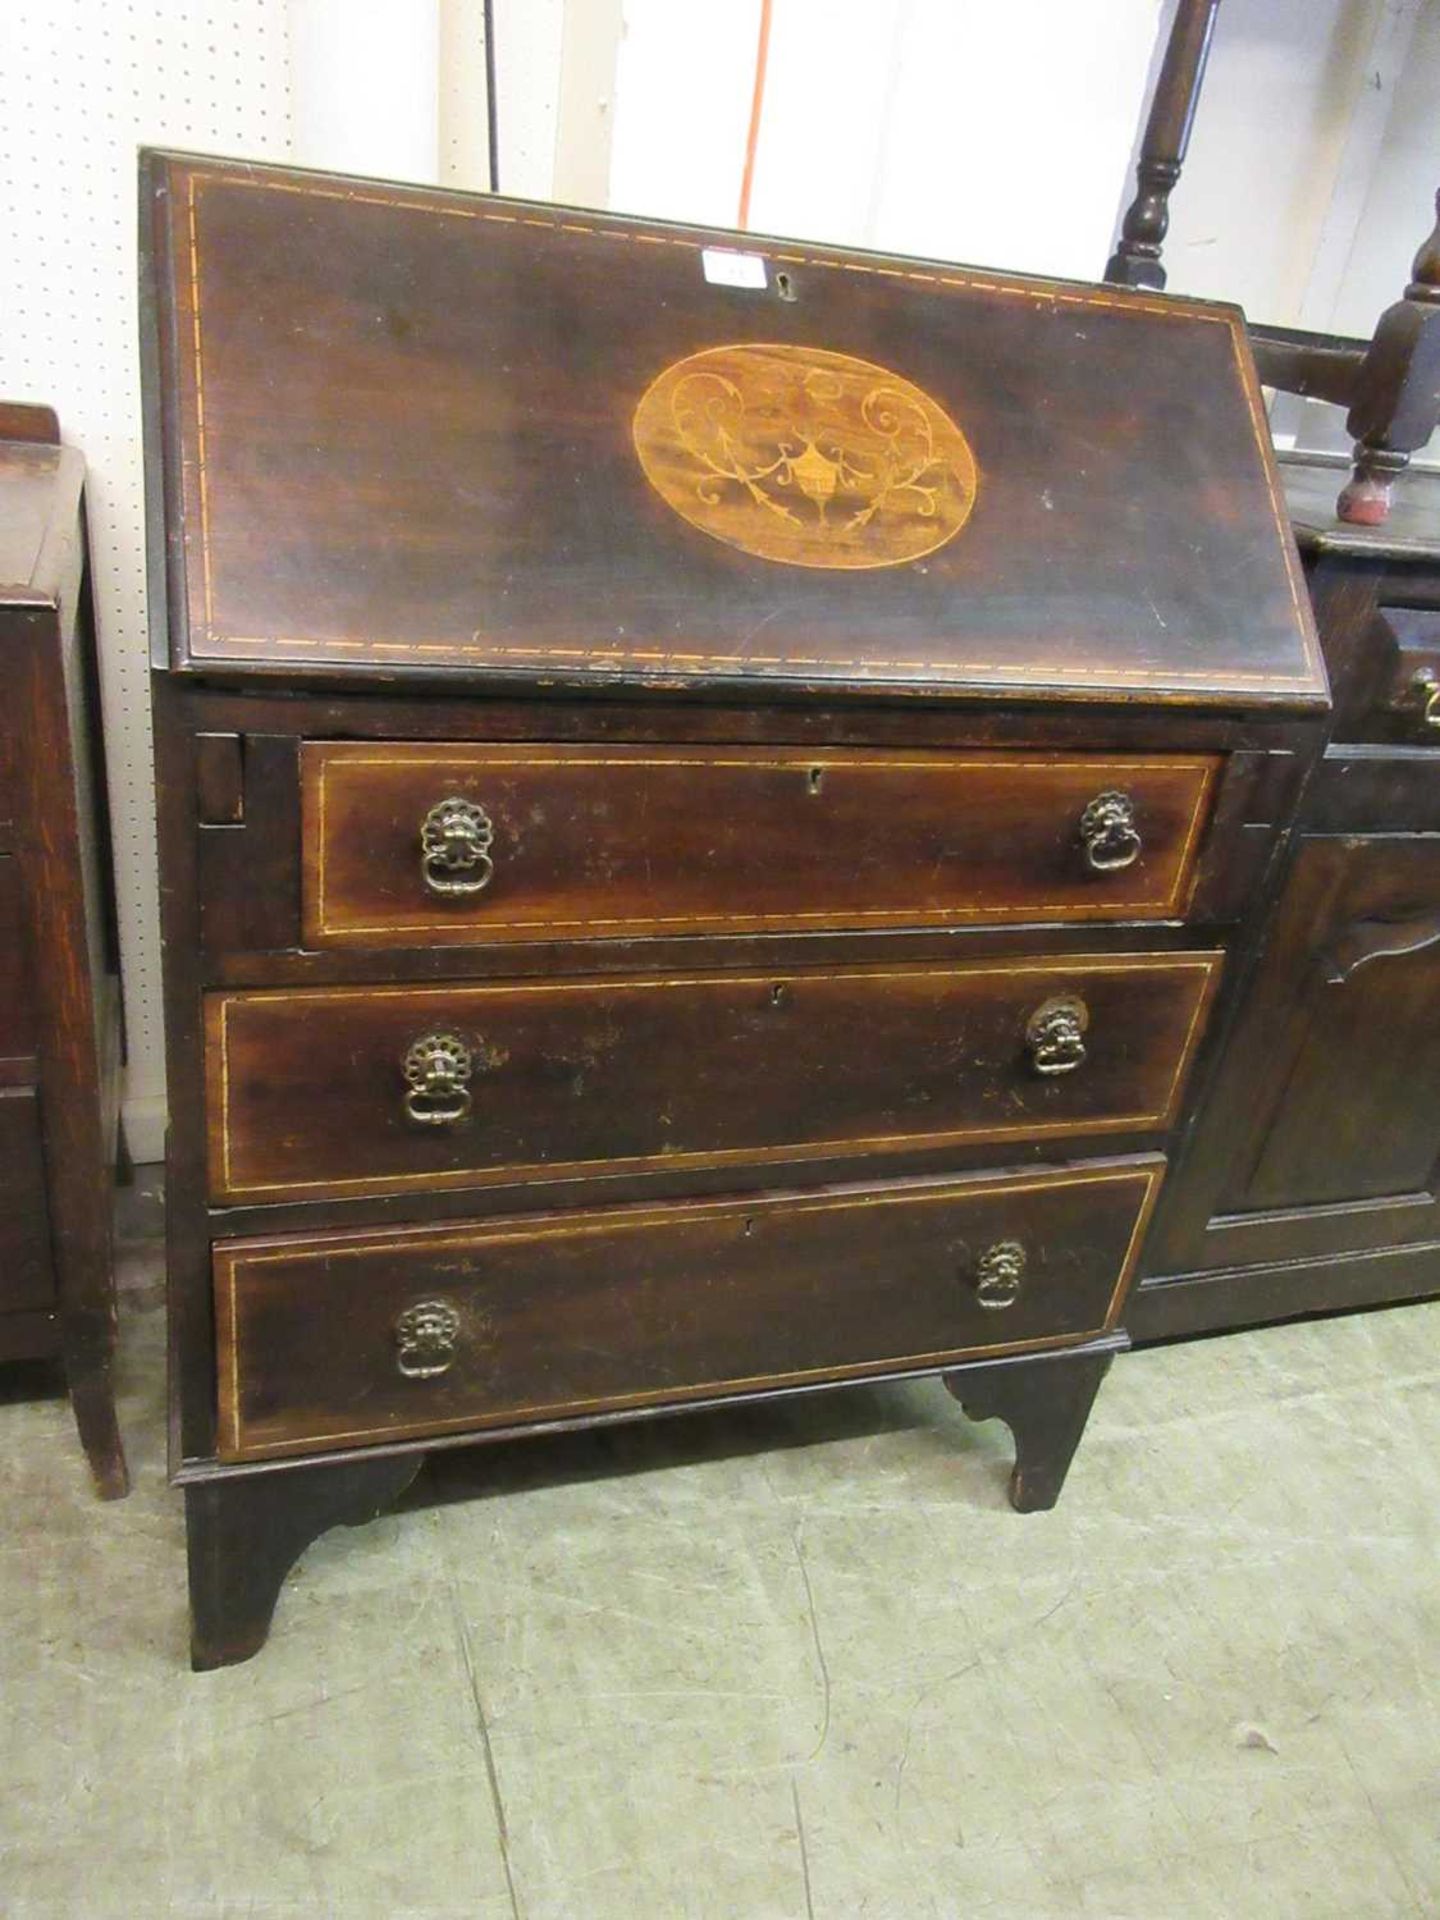 An early 20th century mahogany, strung, and marquetry bureau